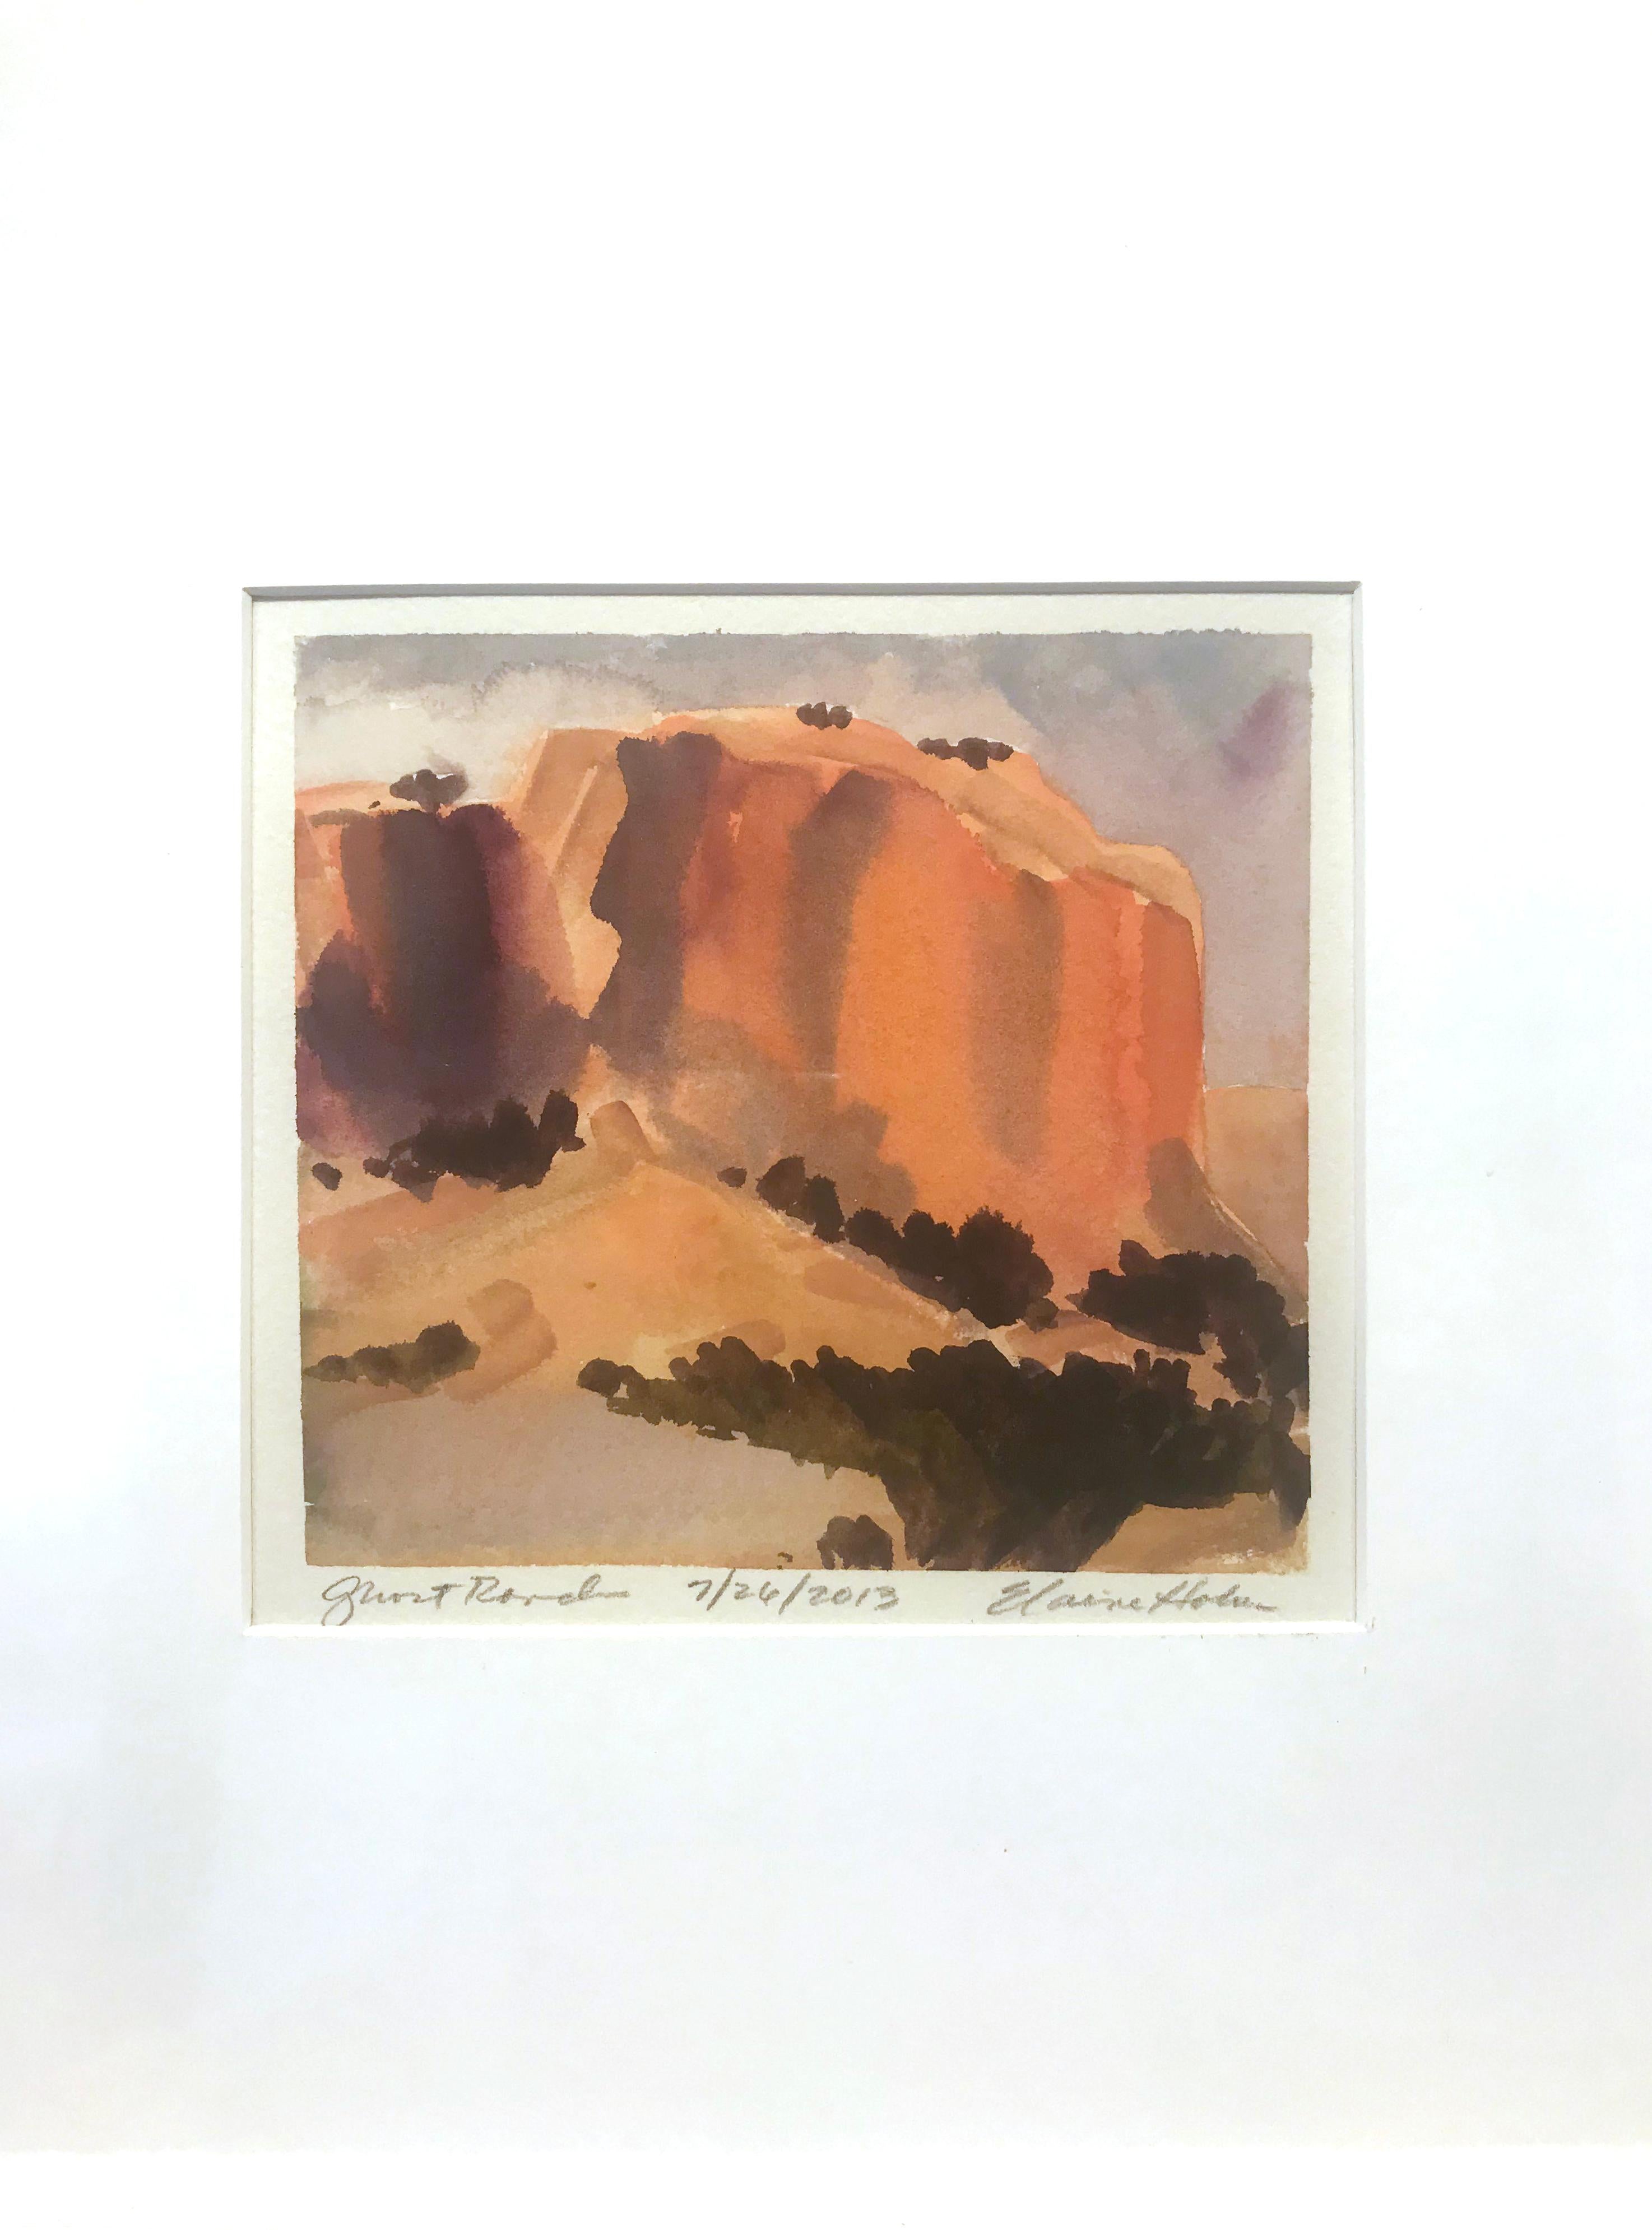 Ghost Ranch 7/26/2013  - Painting by Elaine Holien